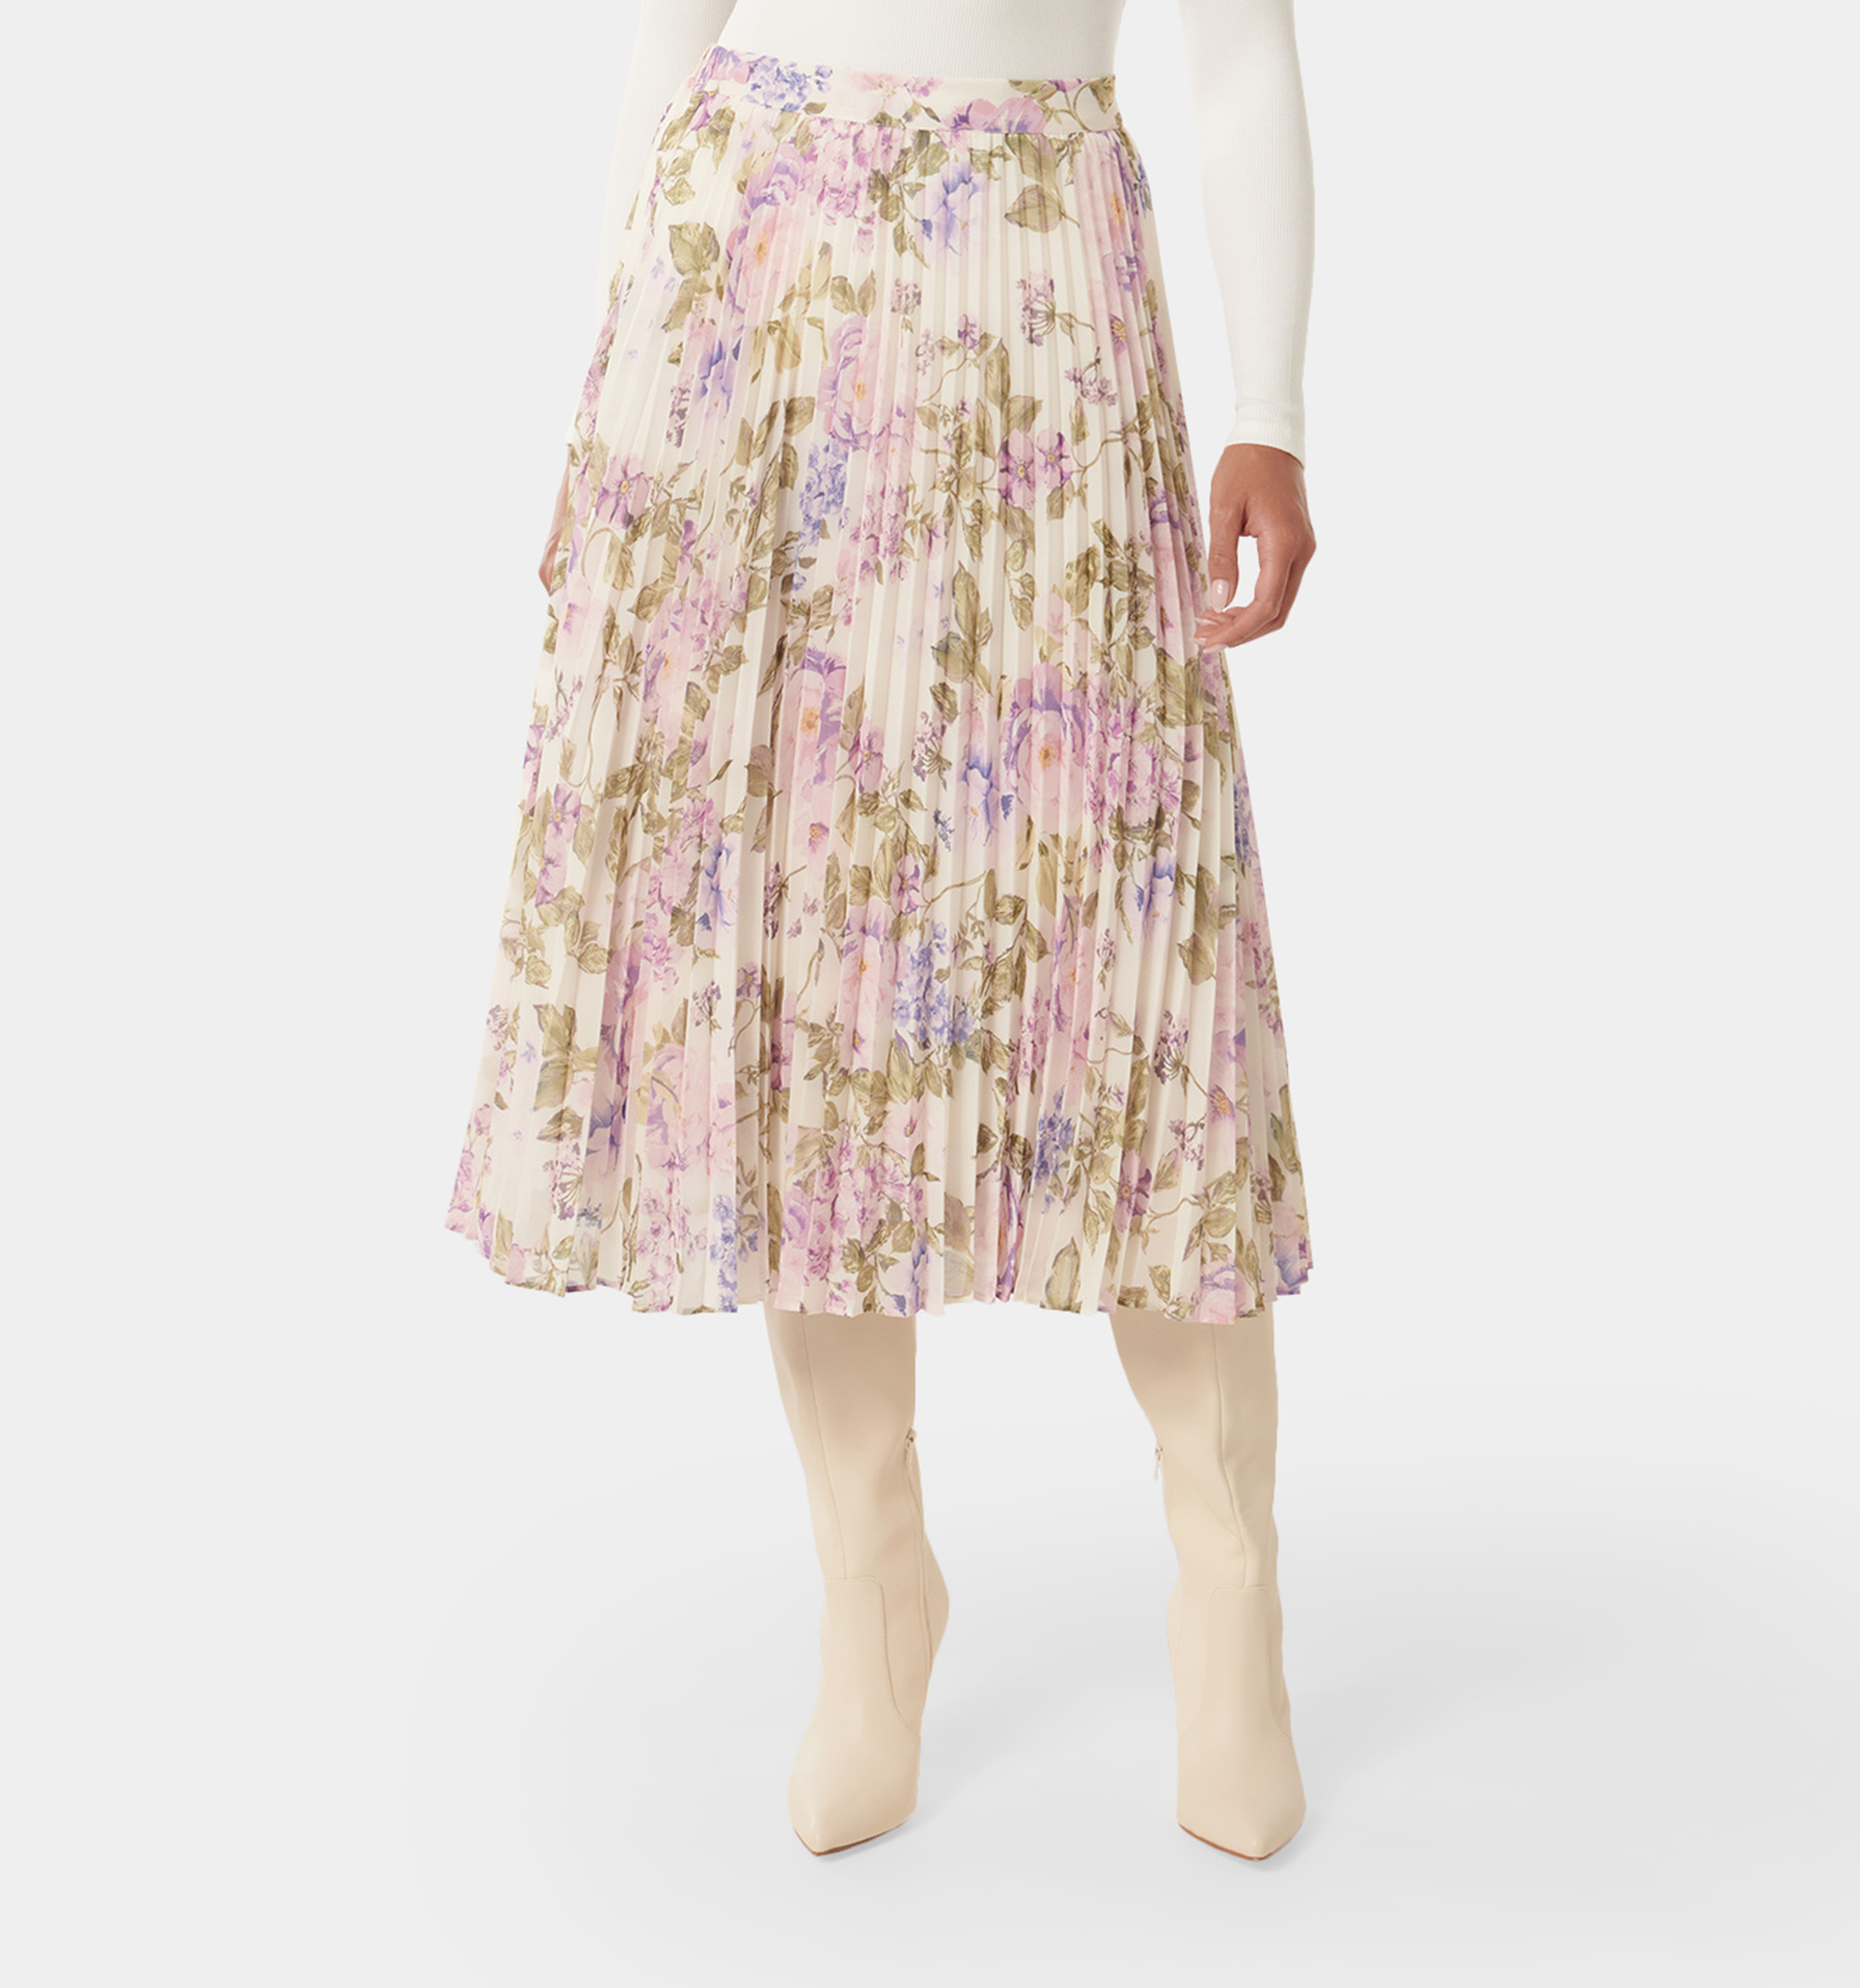 Pleated Dresses & Skirts Under IRN 5,000 TO Buy Online | LBB